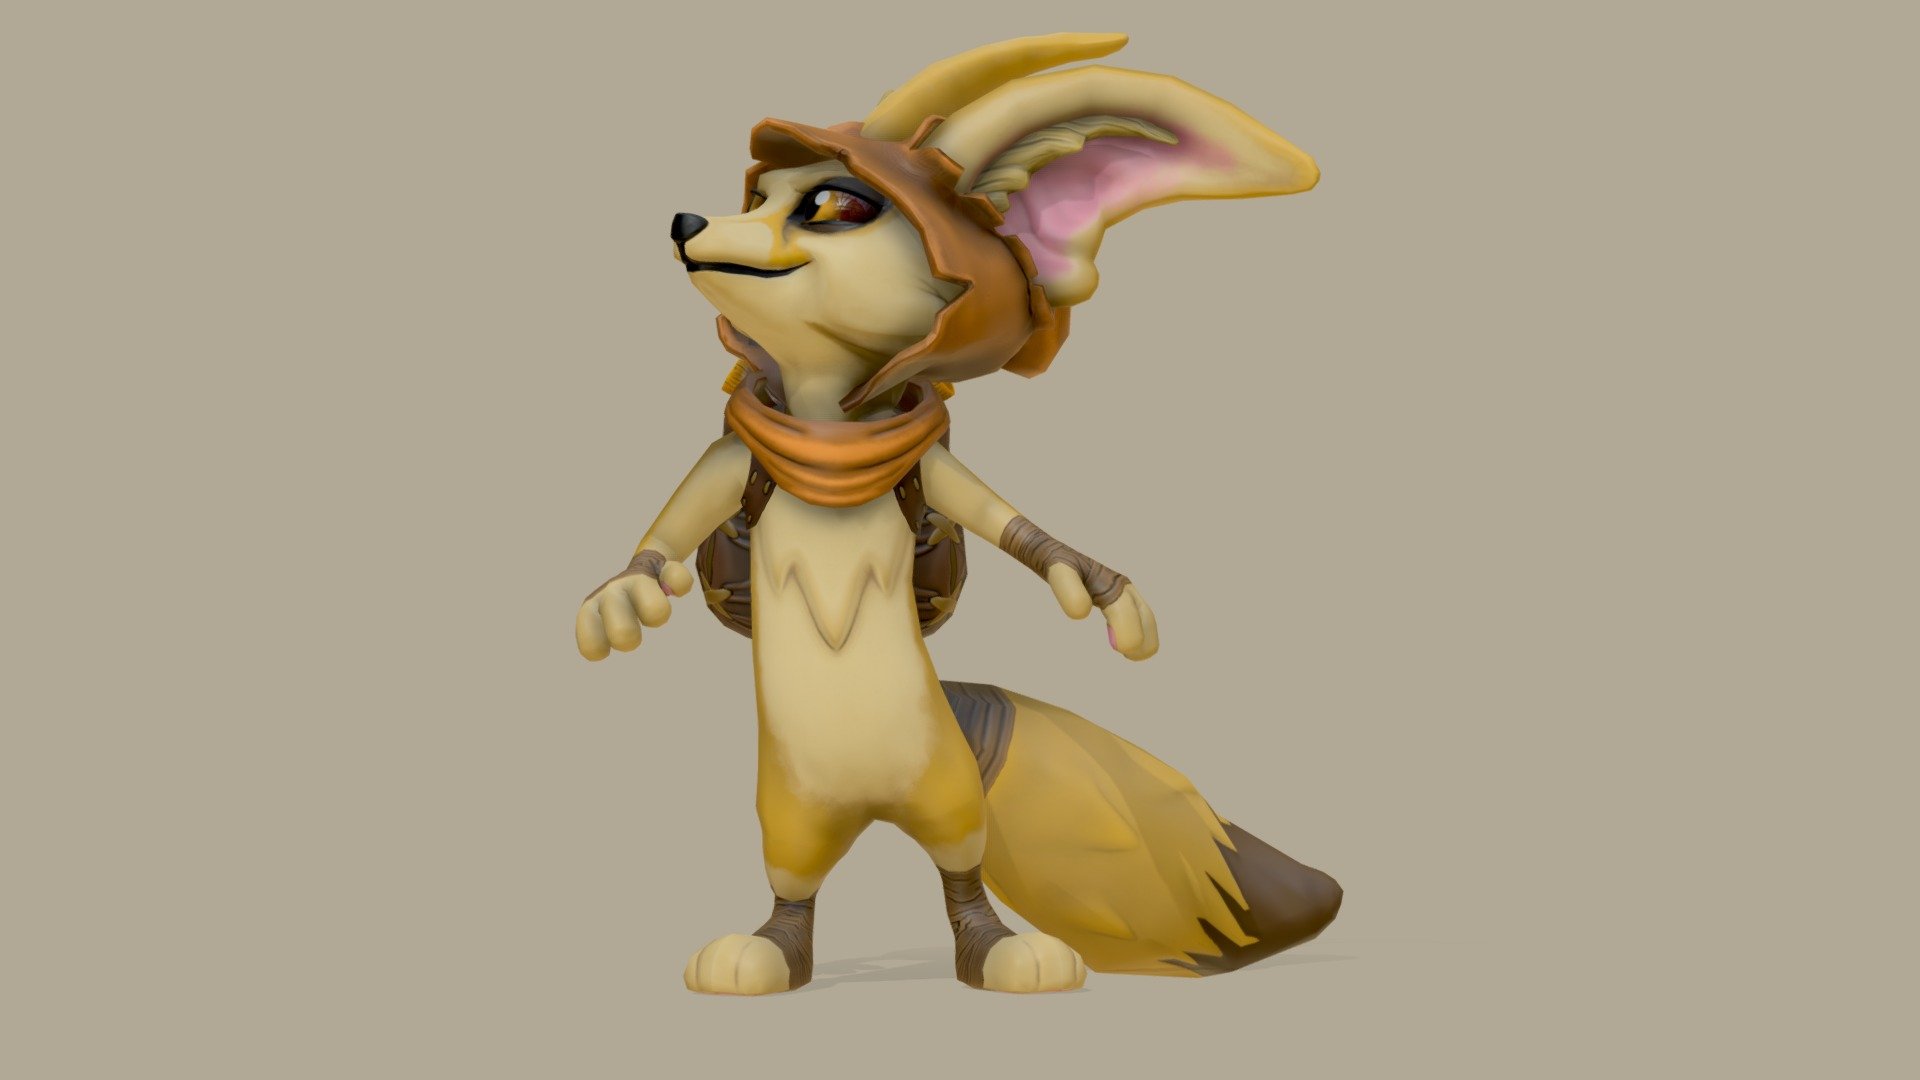 Enemy from desert area in game Cassiodora - Fennec Fox - 3D model by paulo_nathan 3d model